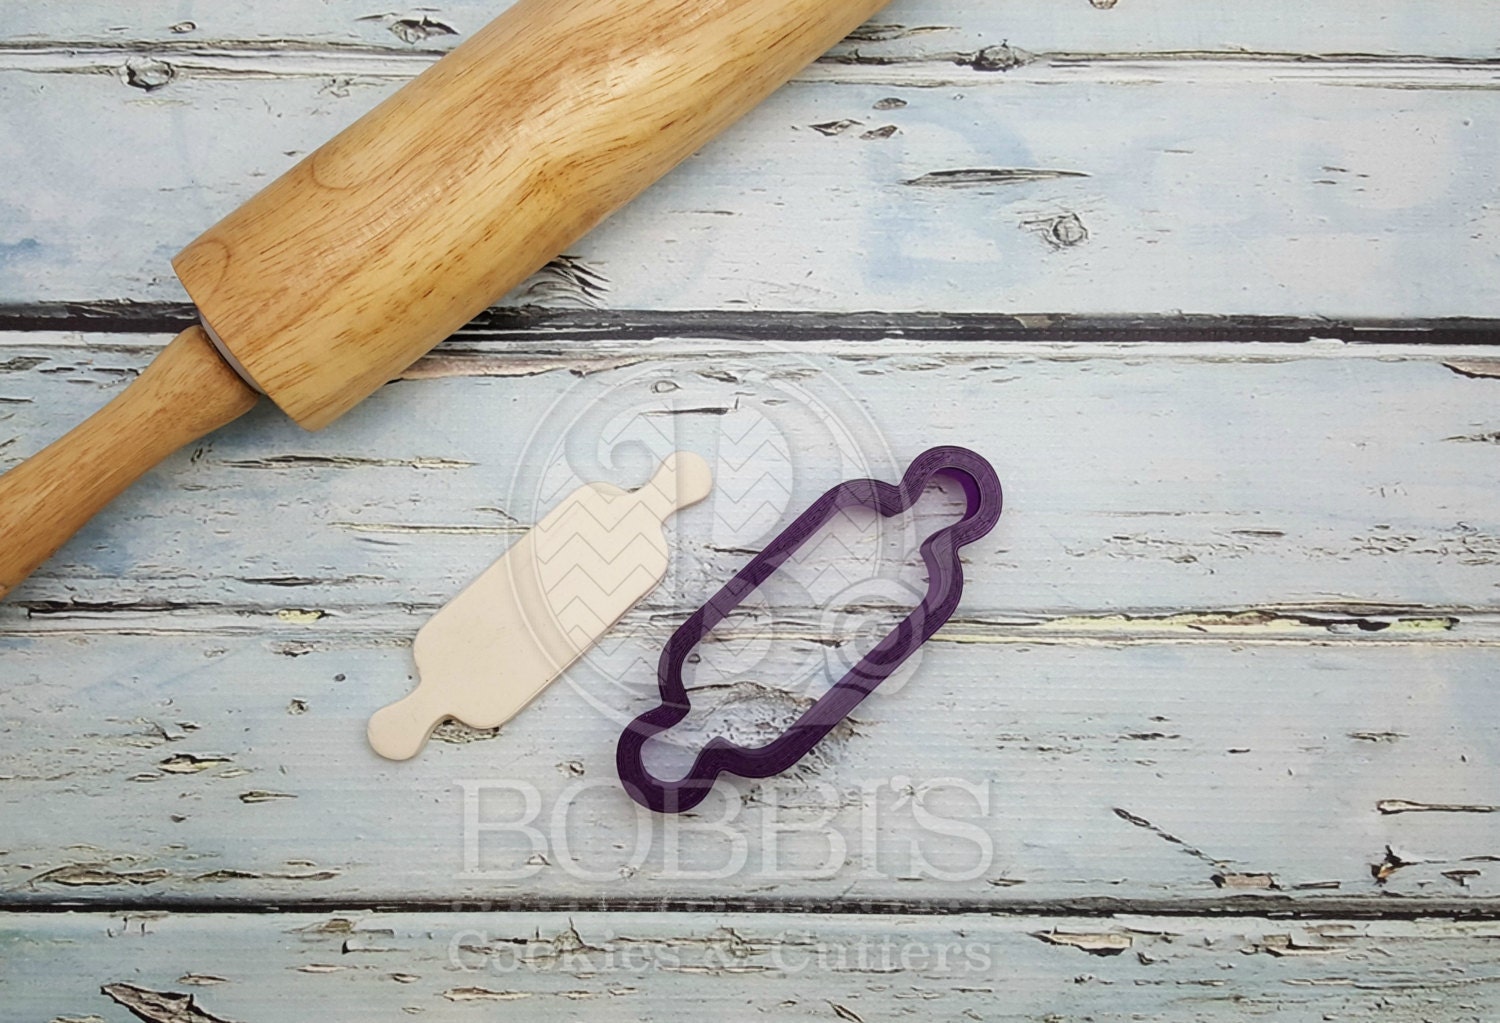 Rolling Pin / Roller Pin Small 19.5cm X 2cm Clear Acrylic Polymer